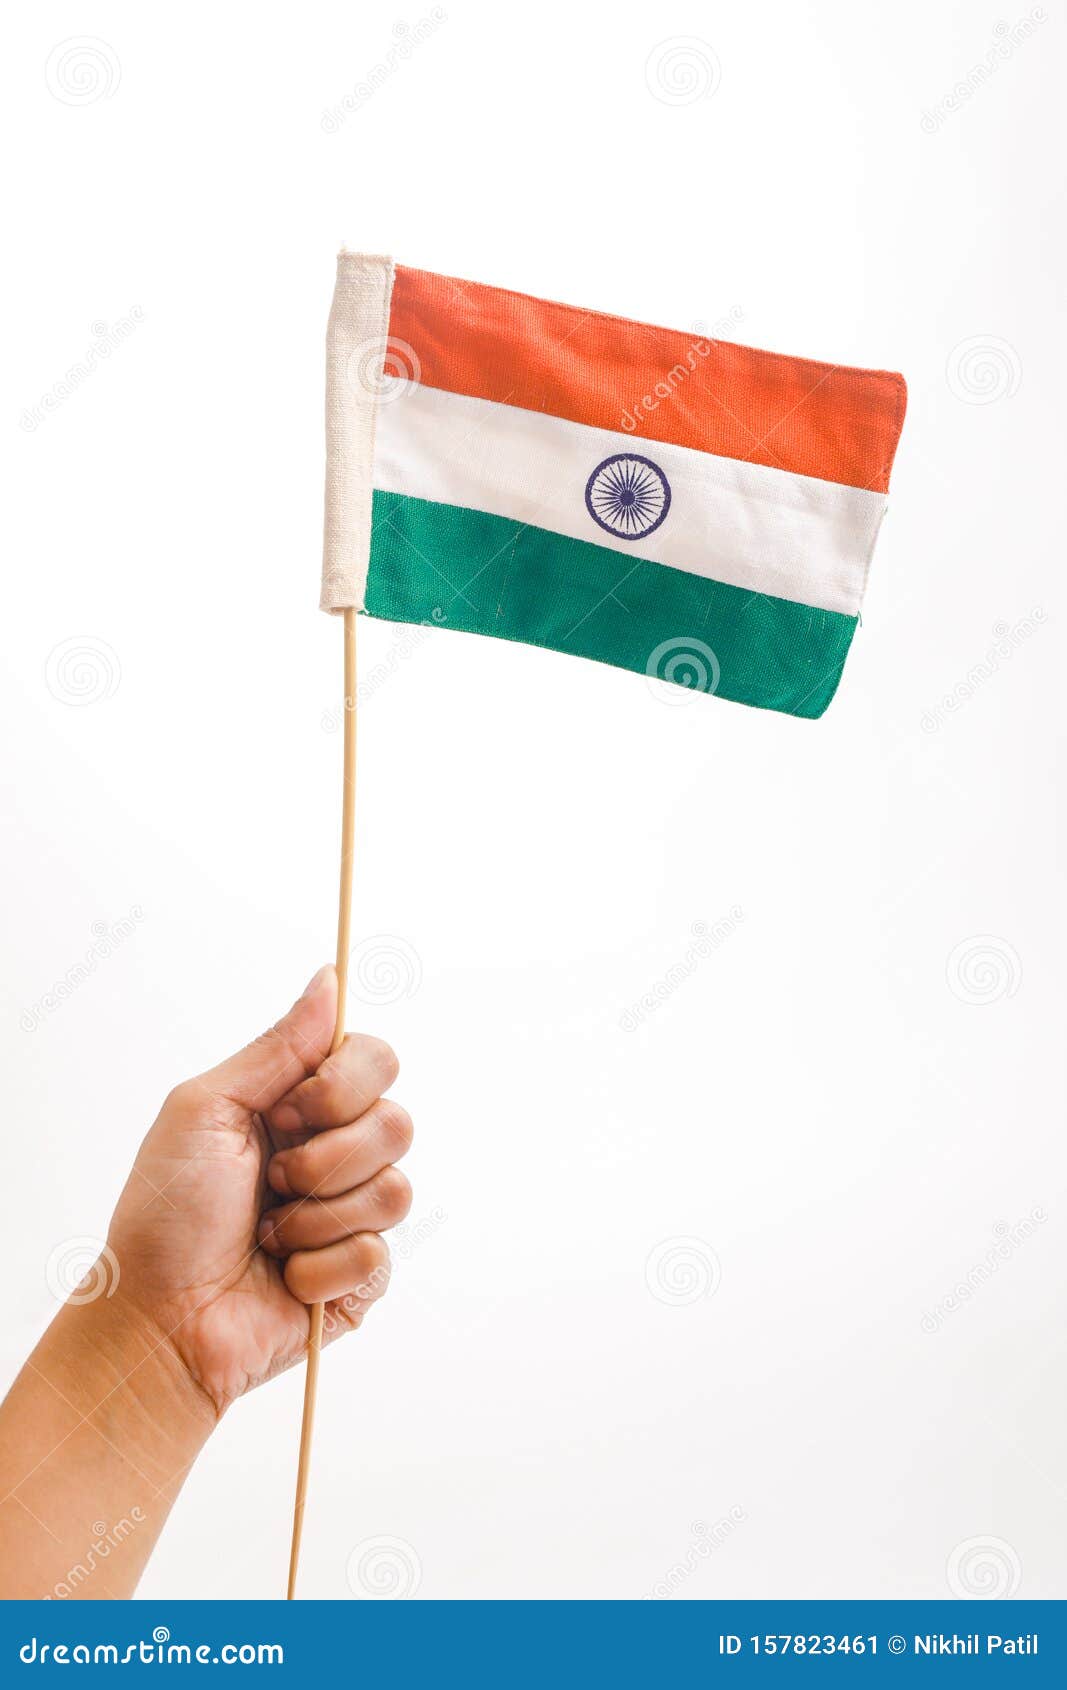 Indian Tricolor Flag Over White Background Stock Image - Image of hind,  flying: 157823461